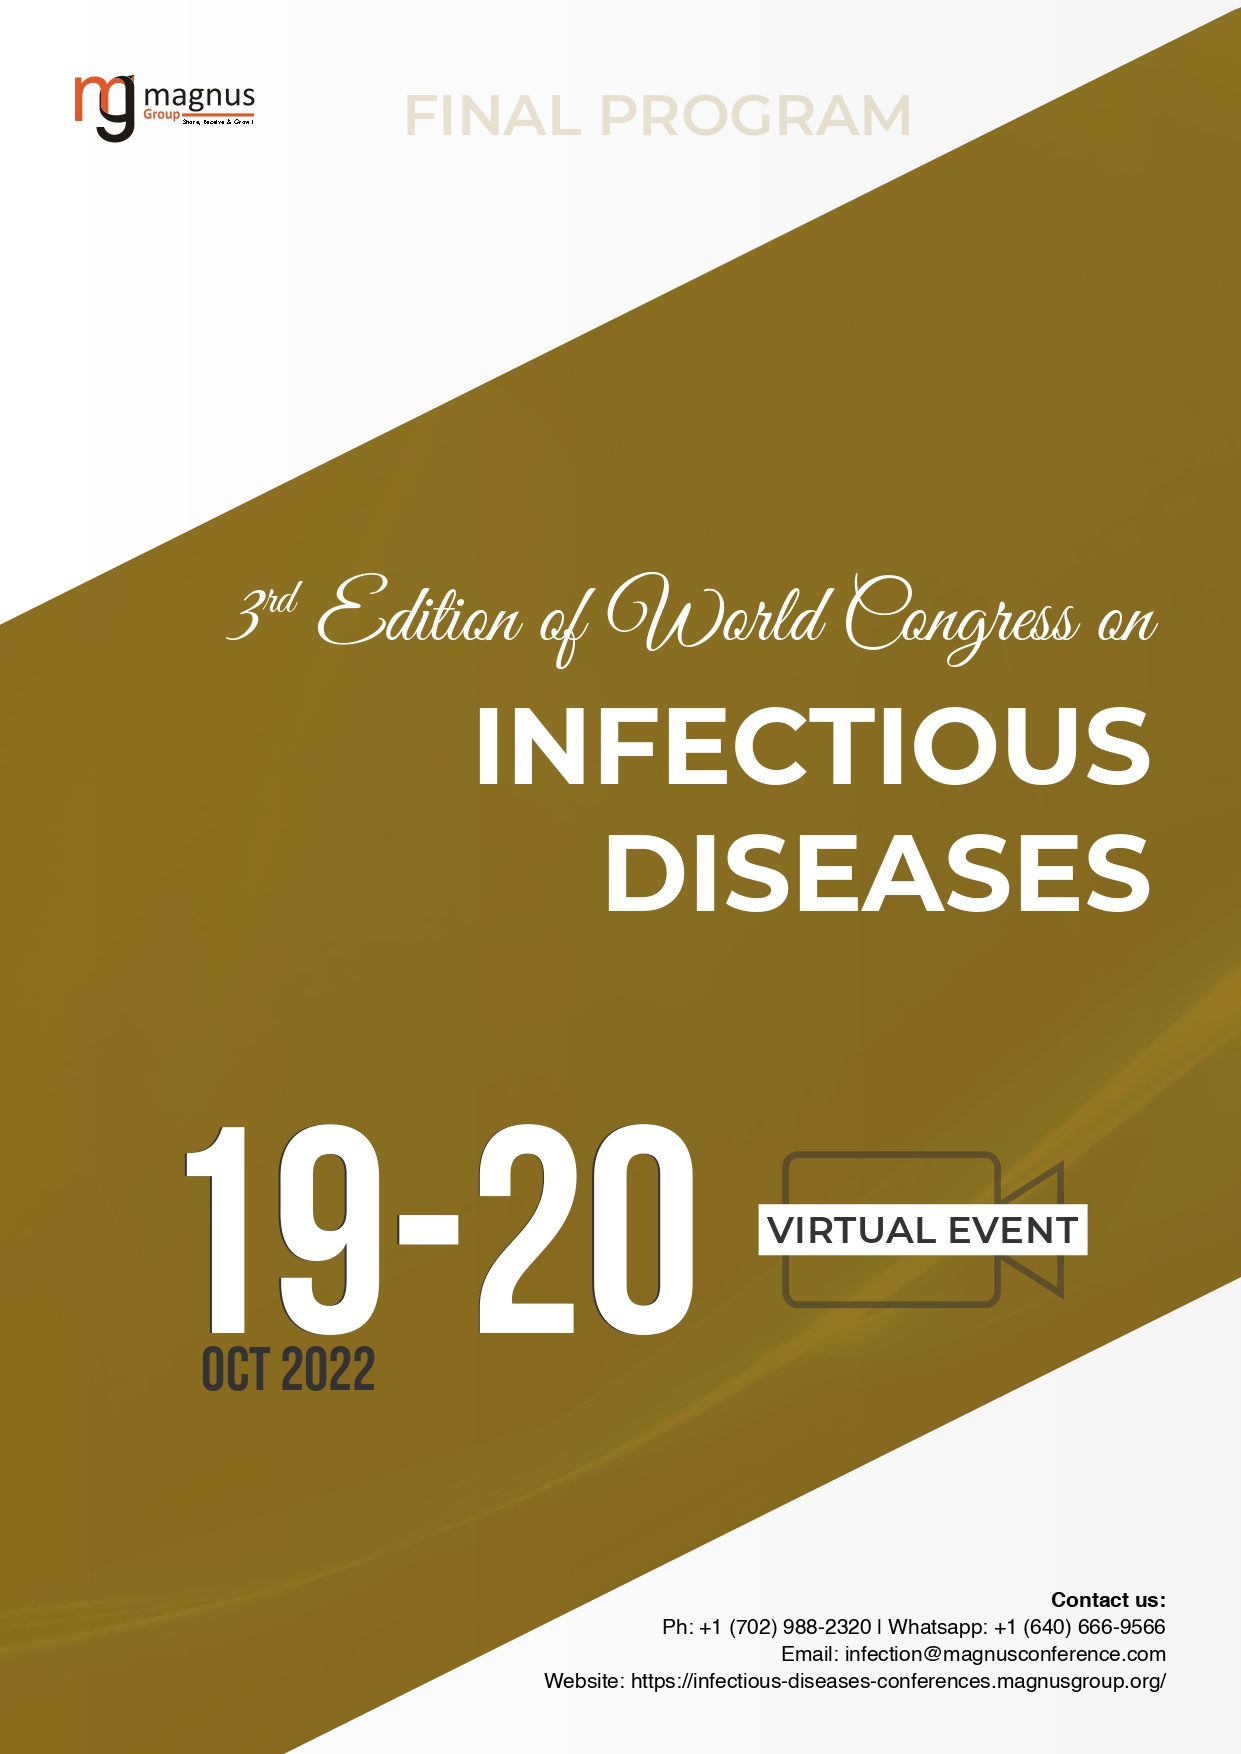 3rd Edition of World Congress on Infectious Diseases | Online Event Program